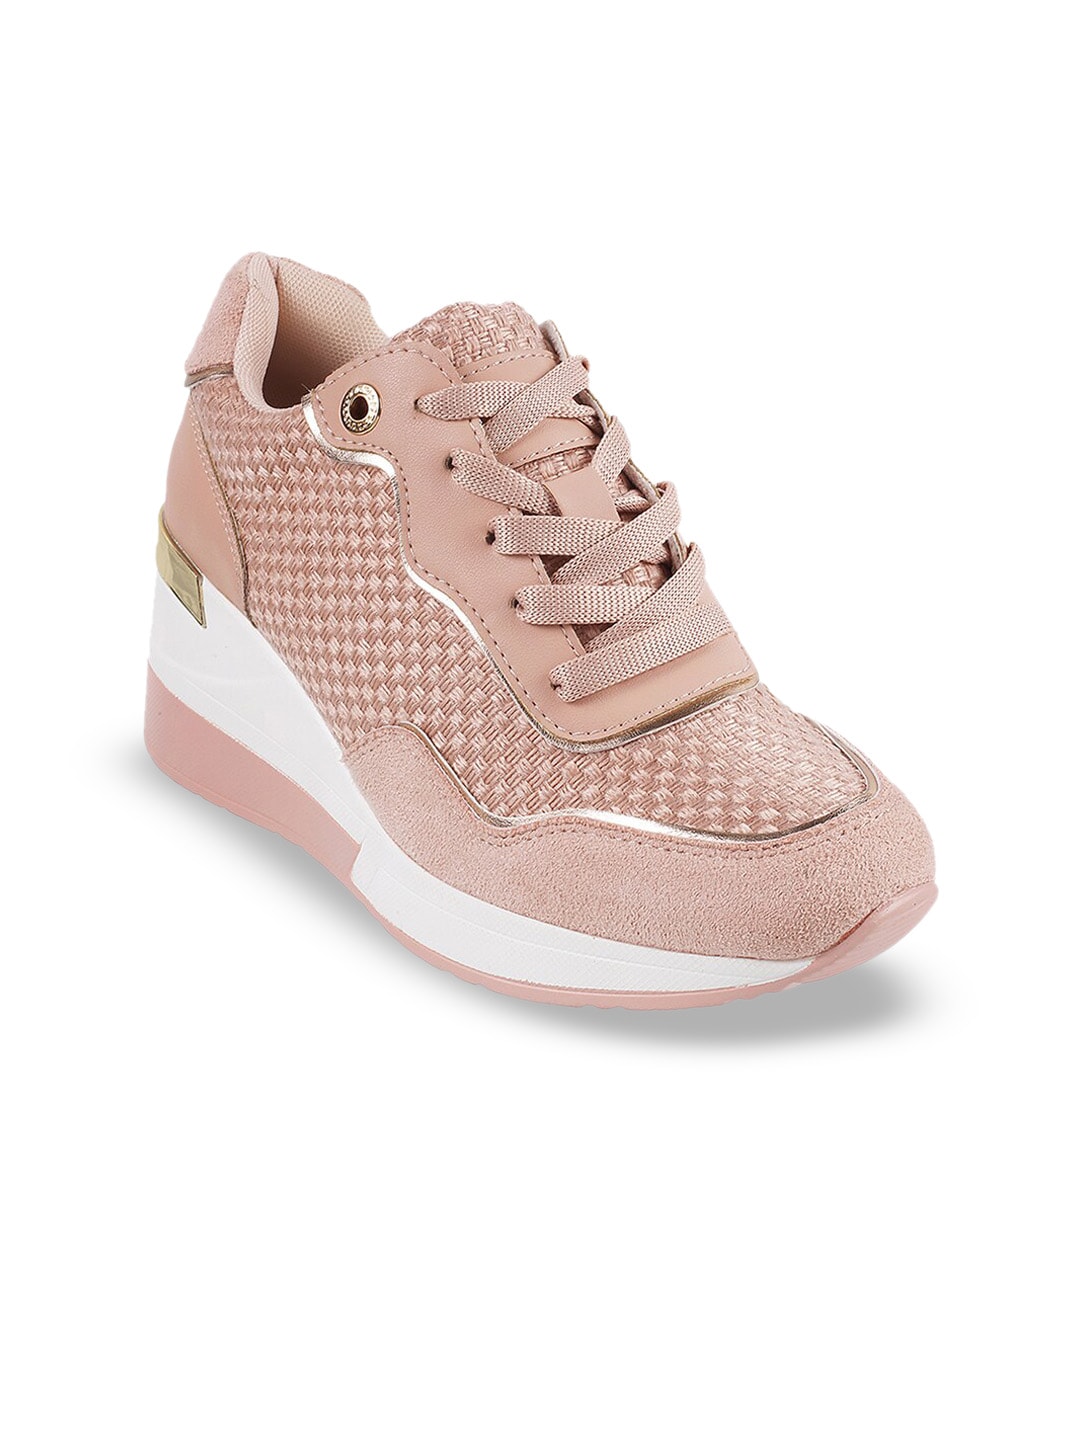 Mochi Women Pink Woven Design Sneakers Price in India